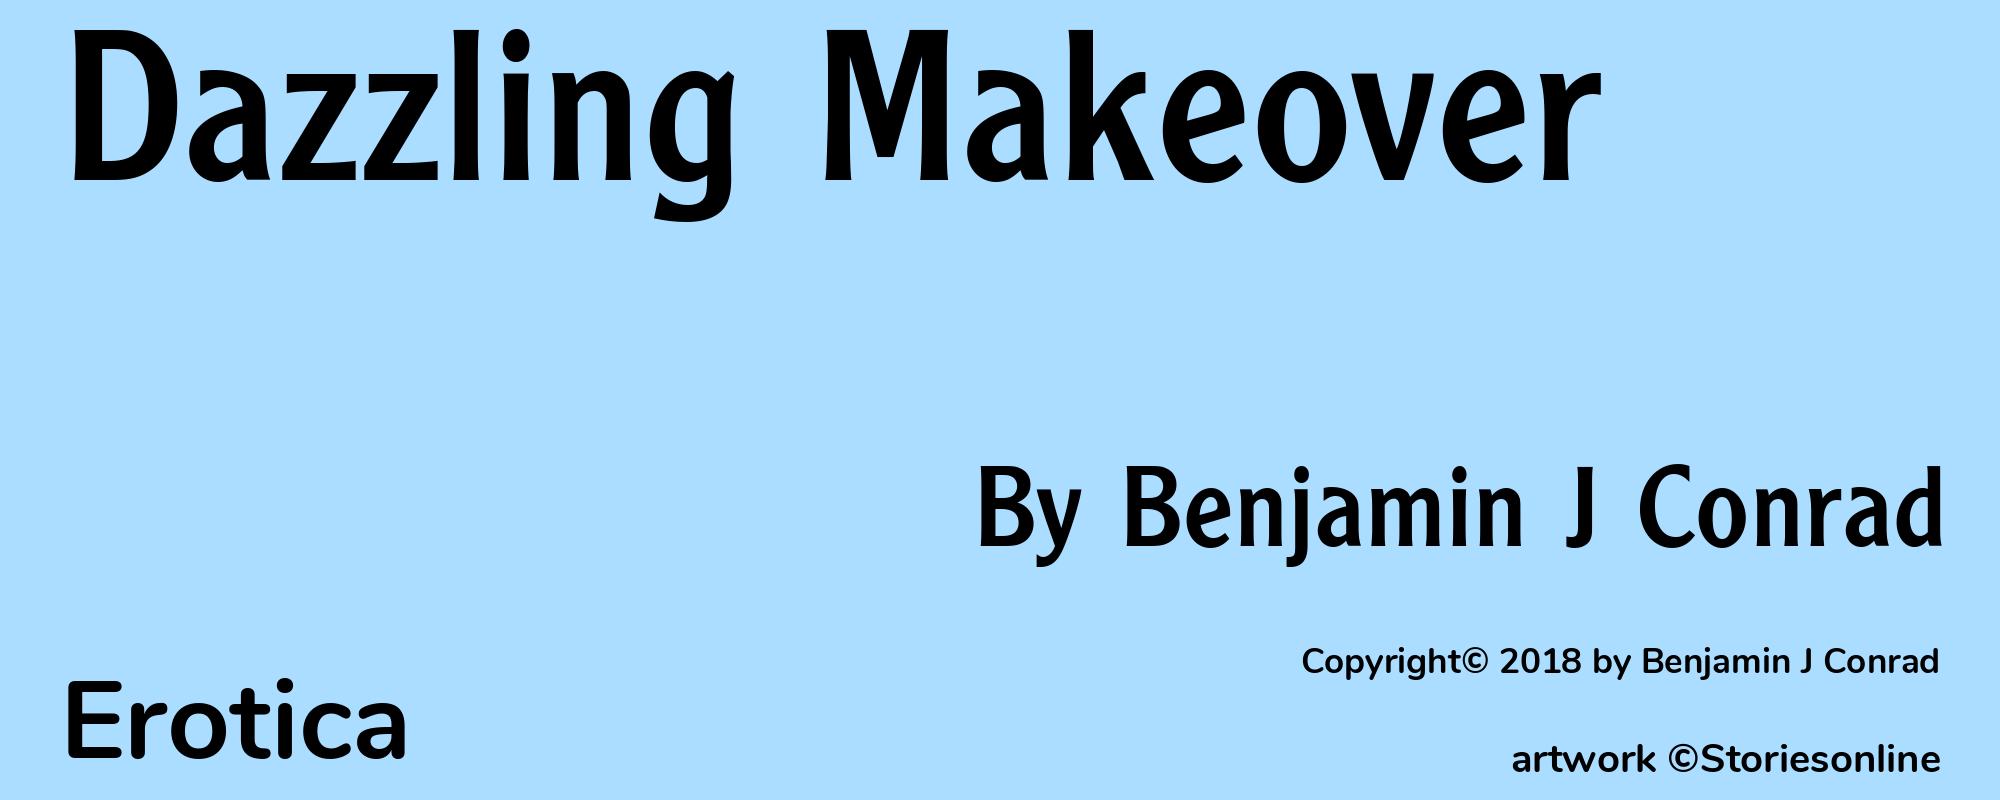 Dazzling Makeover - Cover